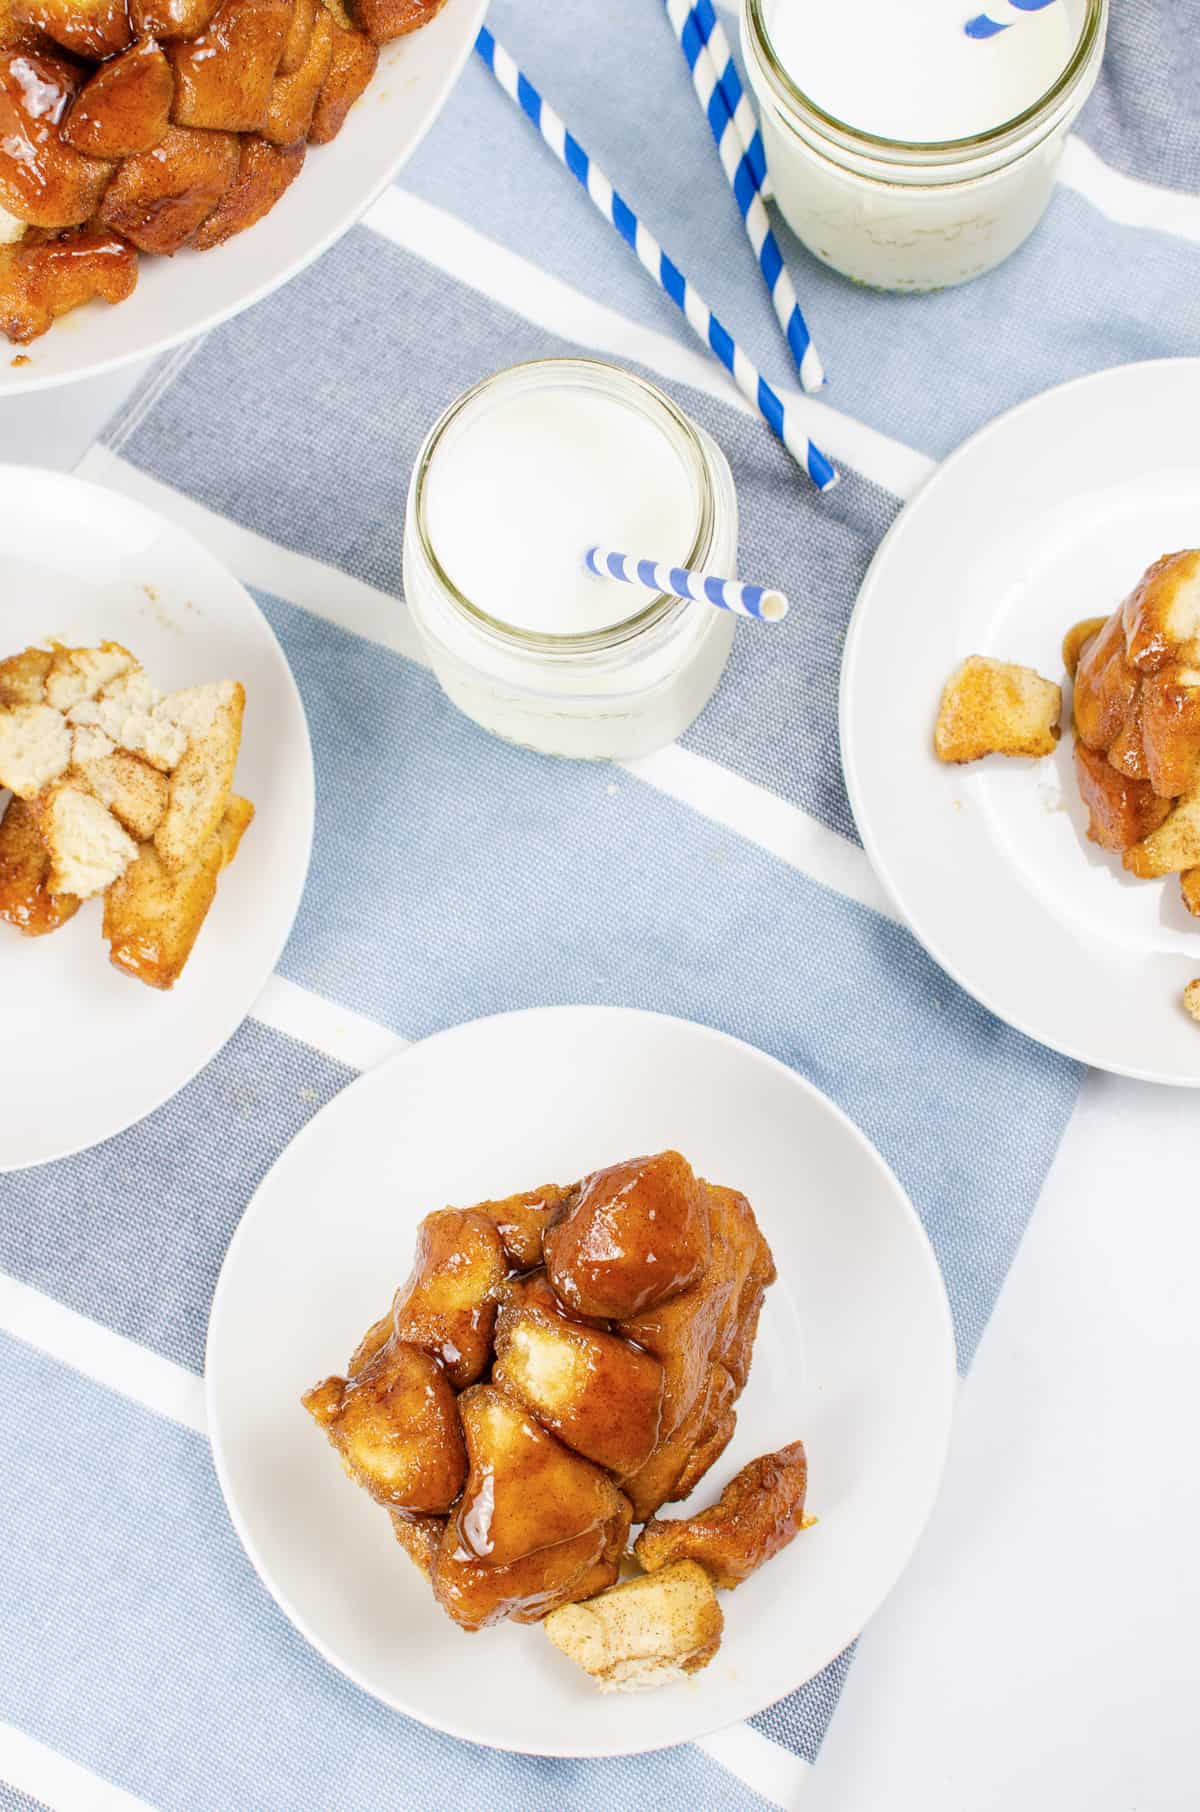 Monkey bread made with canned biscuit dough sliced into large pieces and served on white plates with glasses of milk.